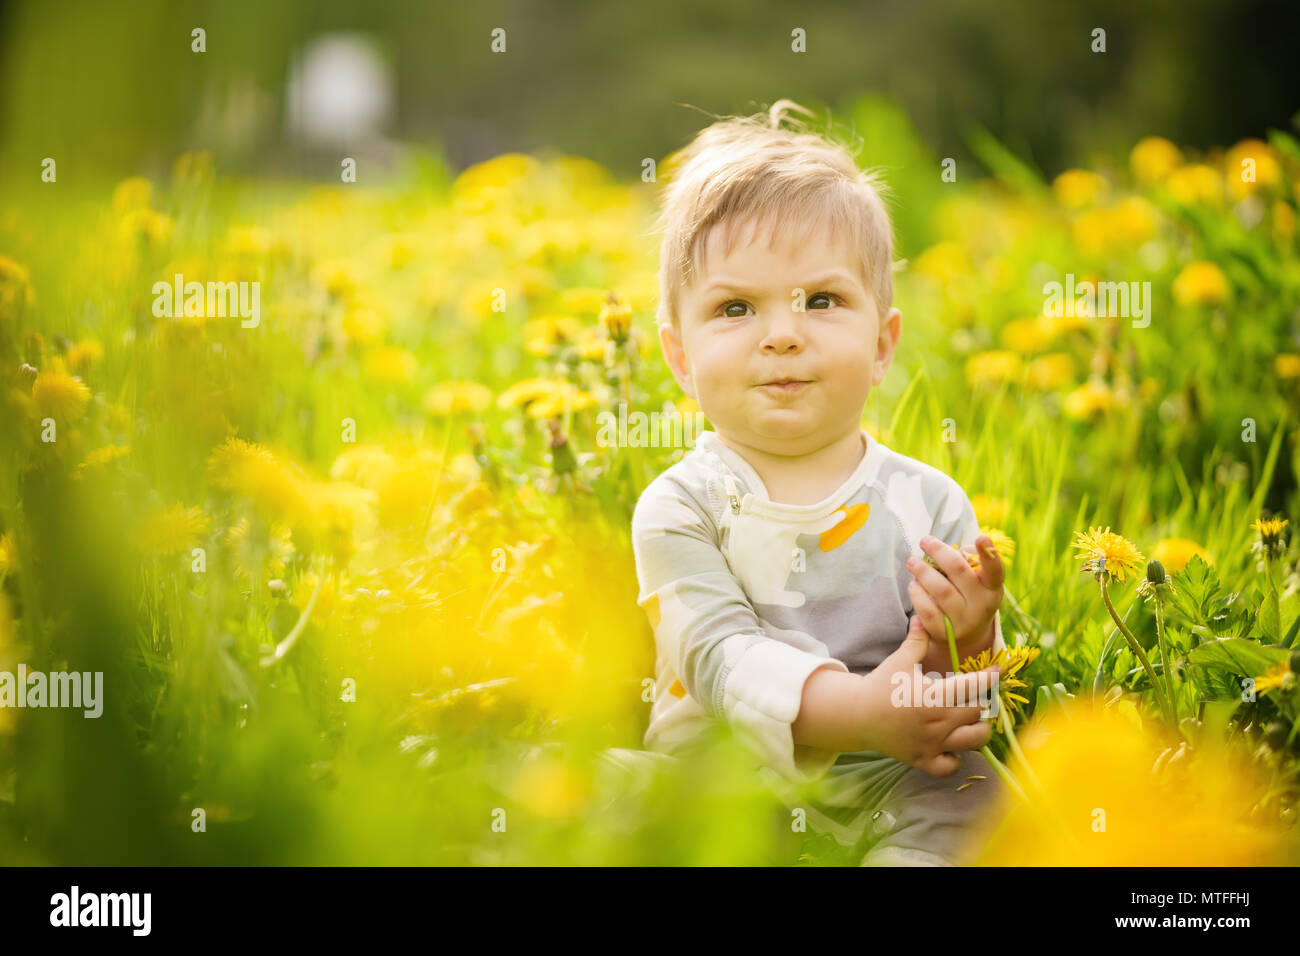 Concept: family values. Portrait of adorable innocent funny brown-eyed baby playing outdoor in the sunny dandelions field. Stock Photo